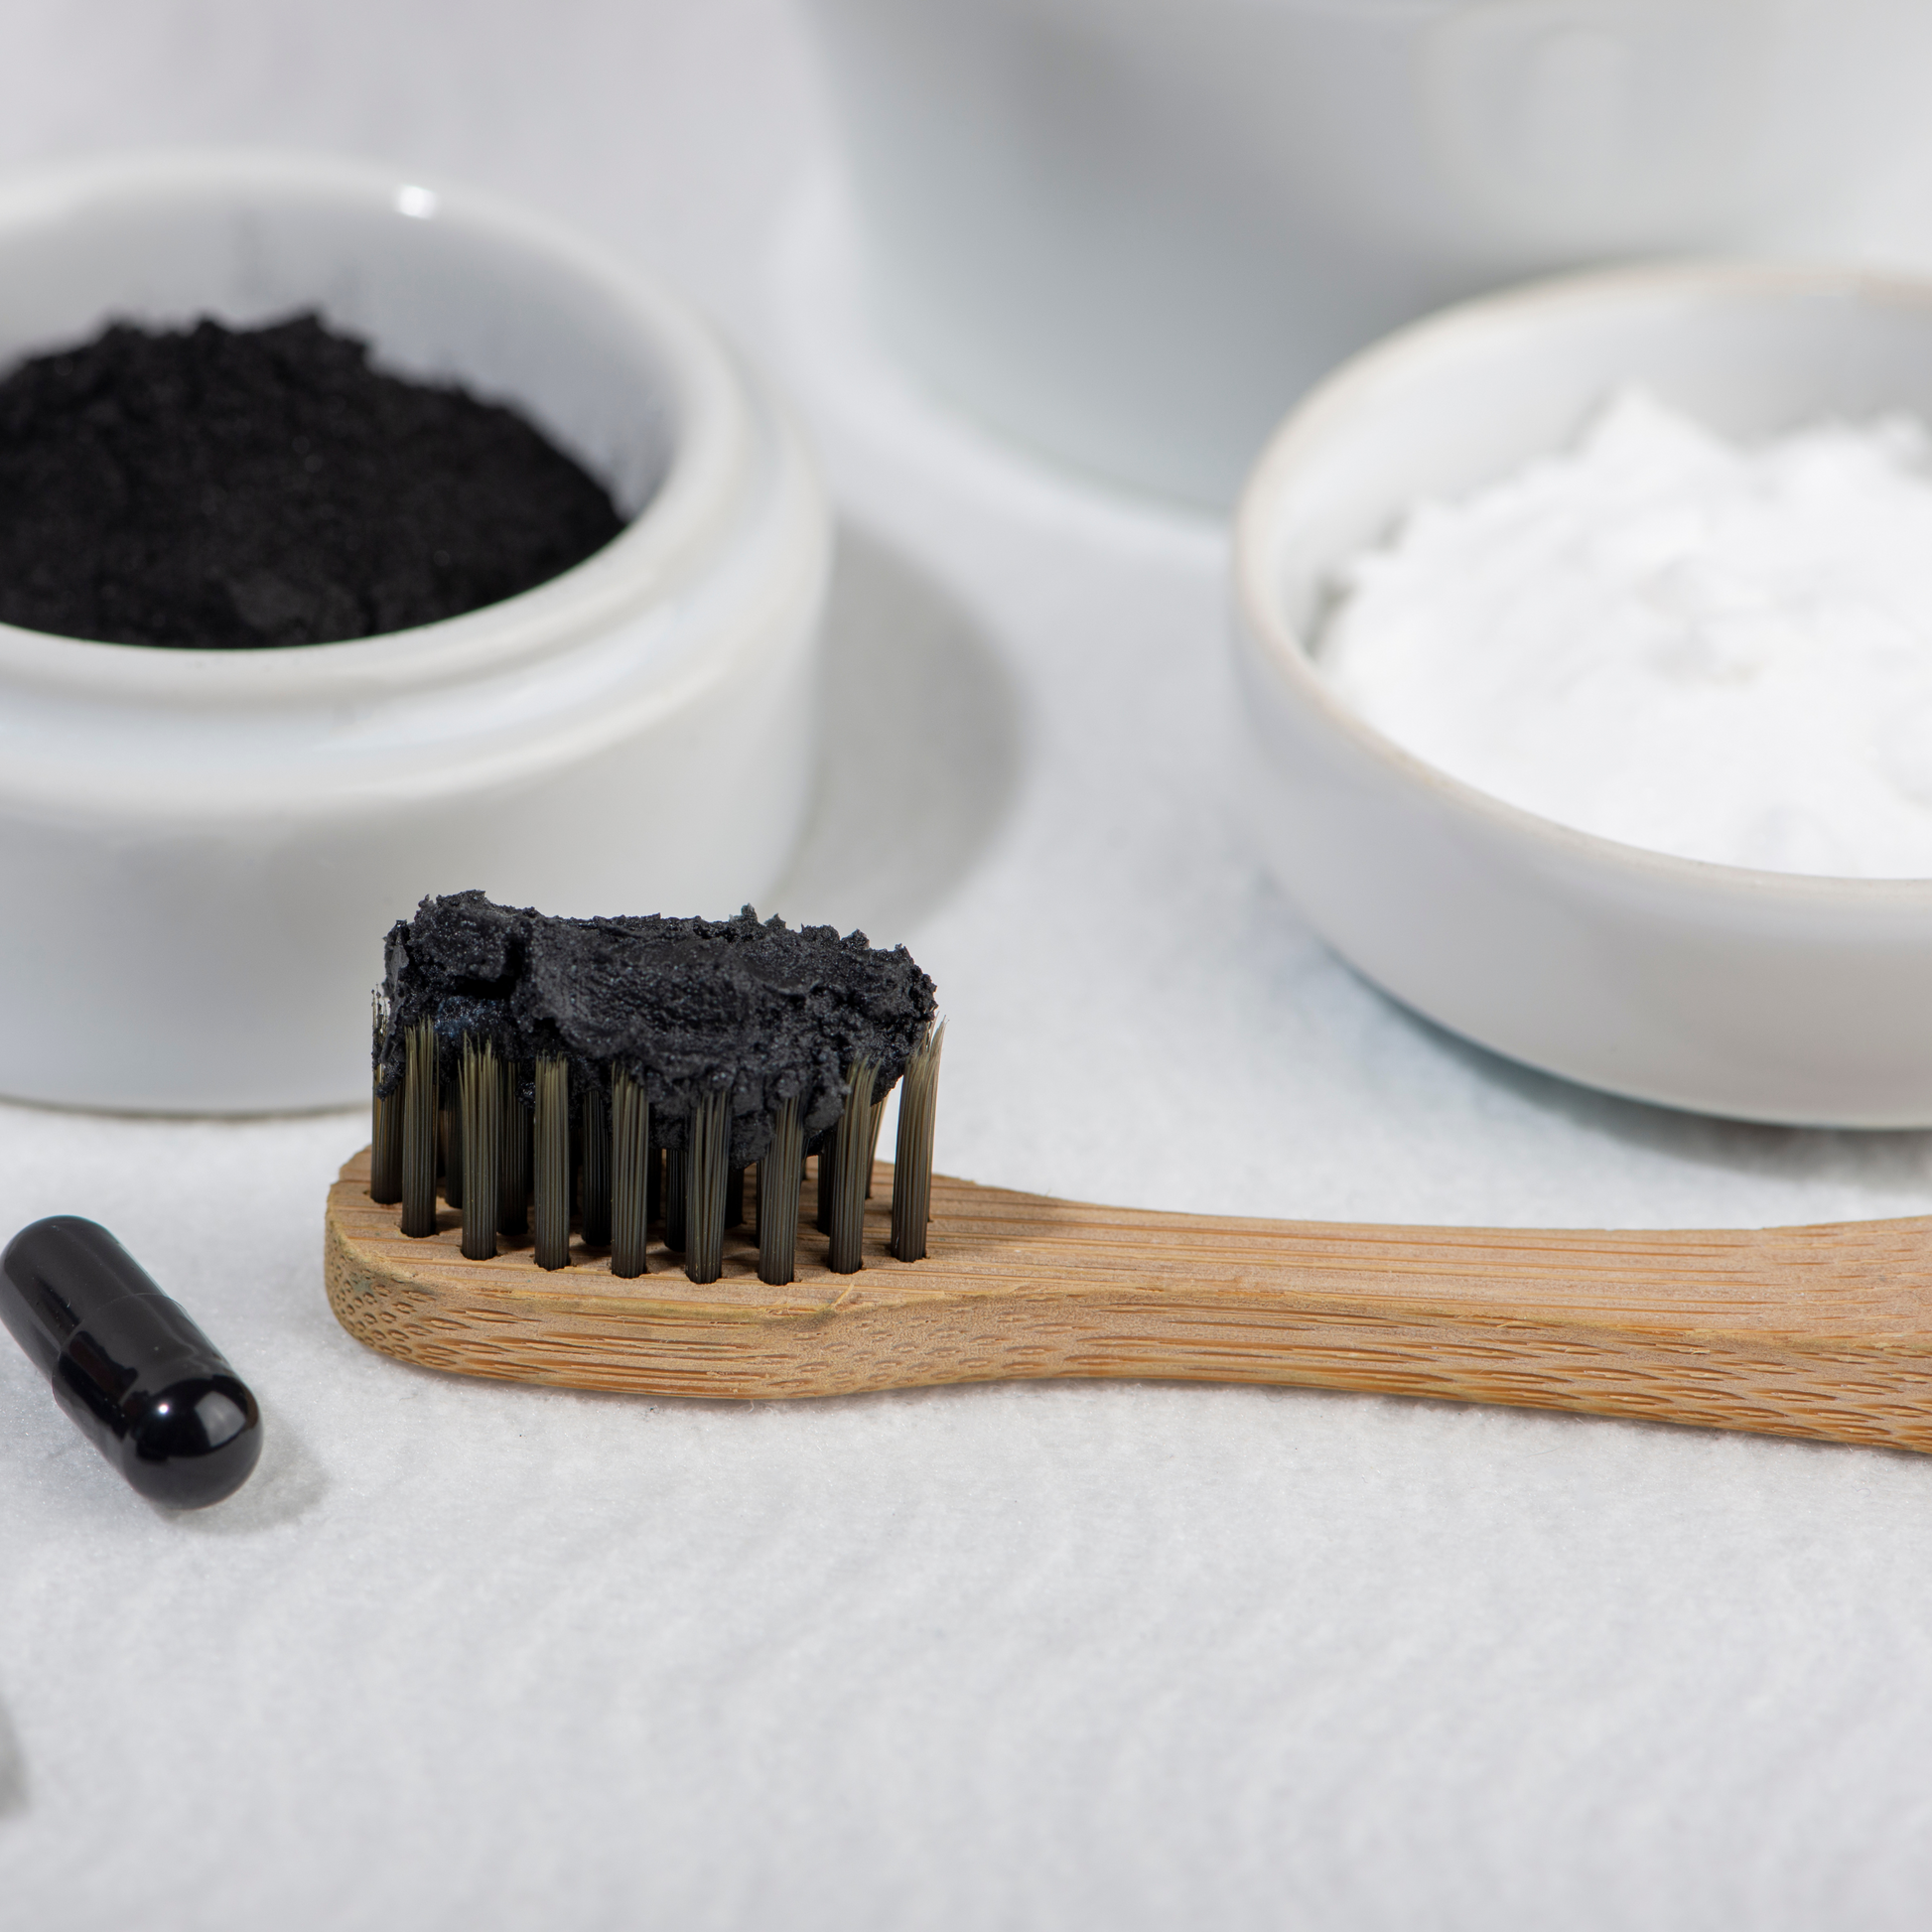 A toothbrush with charcoal and bicarb for homemade toothpaste